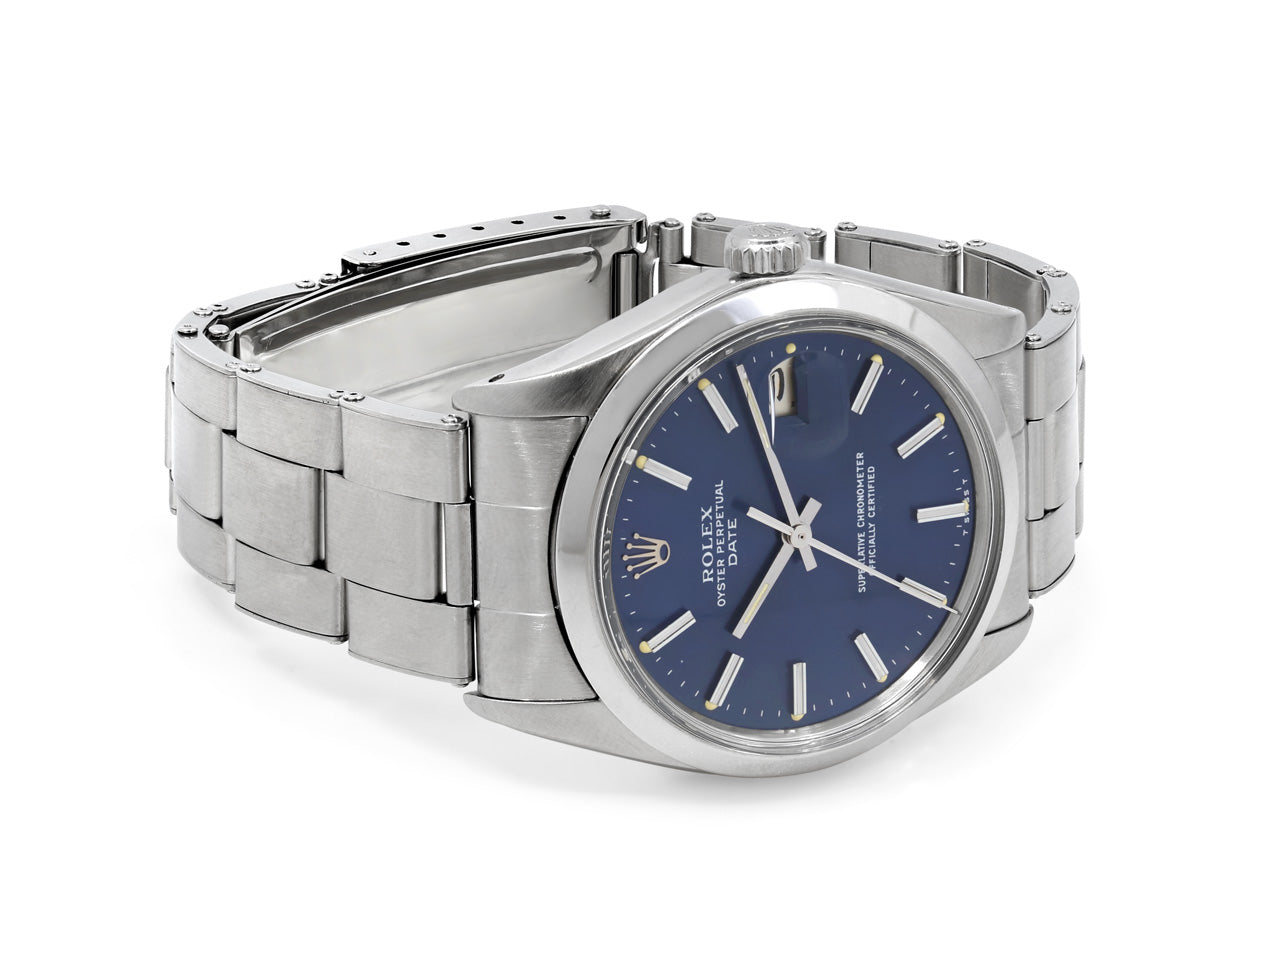 Rolex Oyster Perpetual Date Watch in Stainless Steel, 34 mm